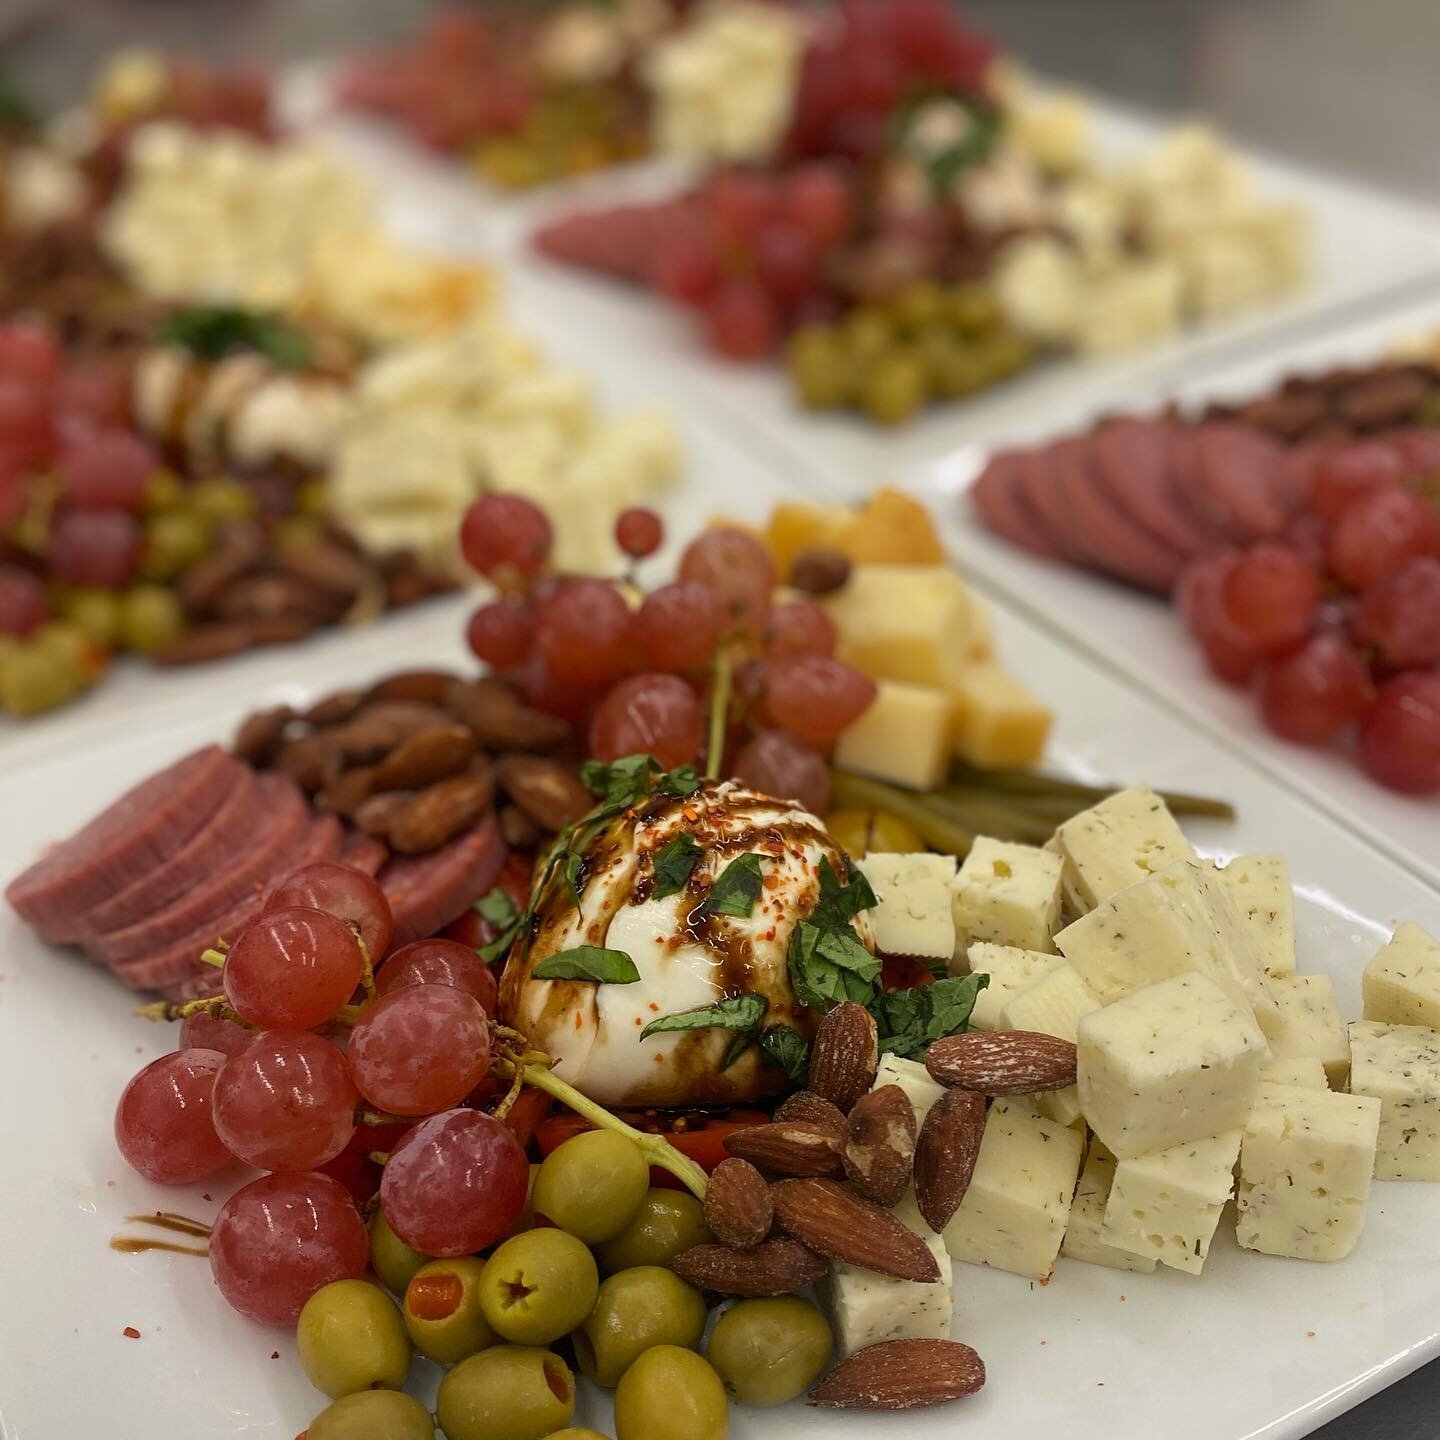 Need some cheese boards for your next event? We do that! Message us for more info